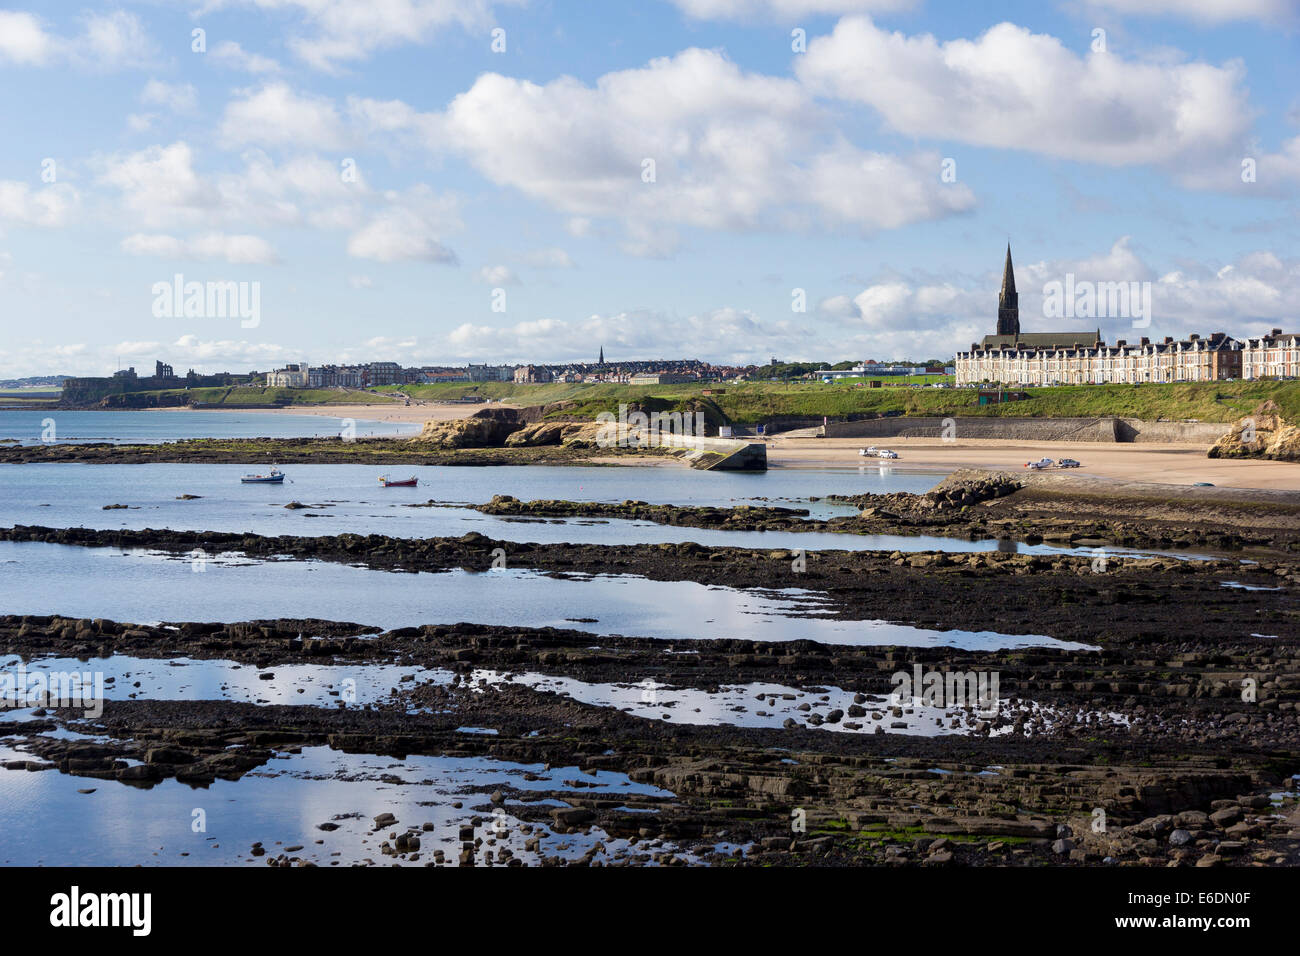 The sandy beaches and rocky shoreline at Cullercoats Bay, Tynemouth, near Newcastle Stock Photo